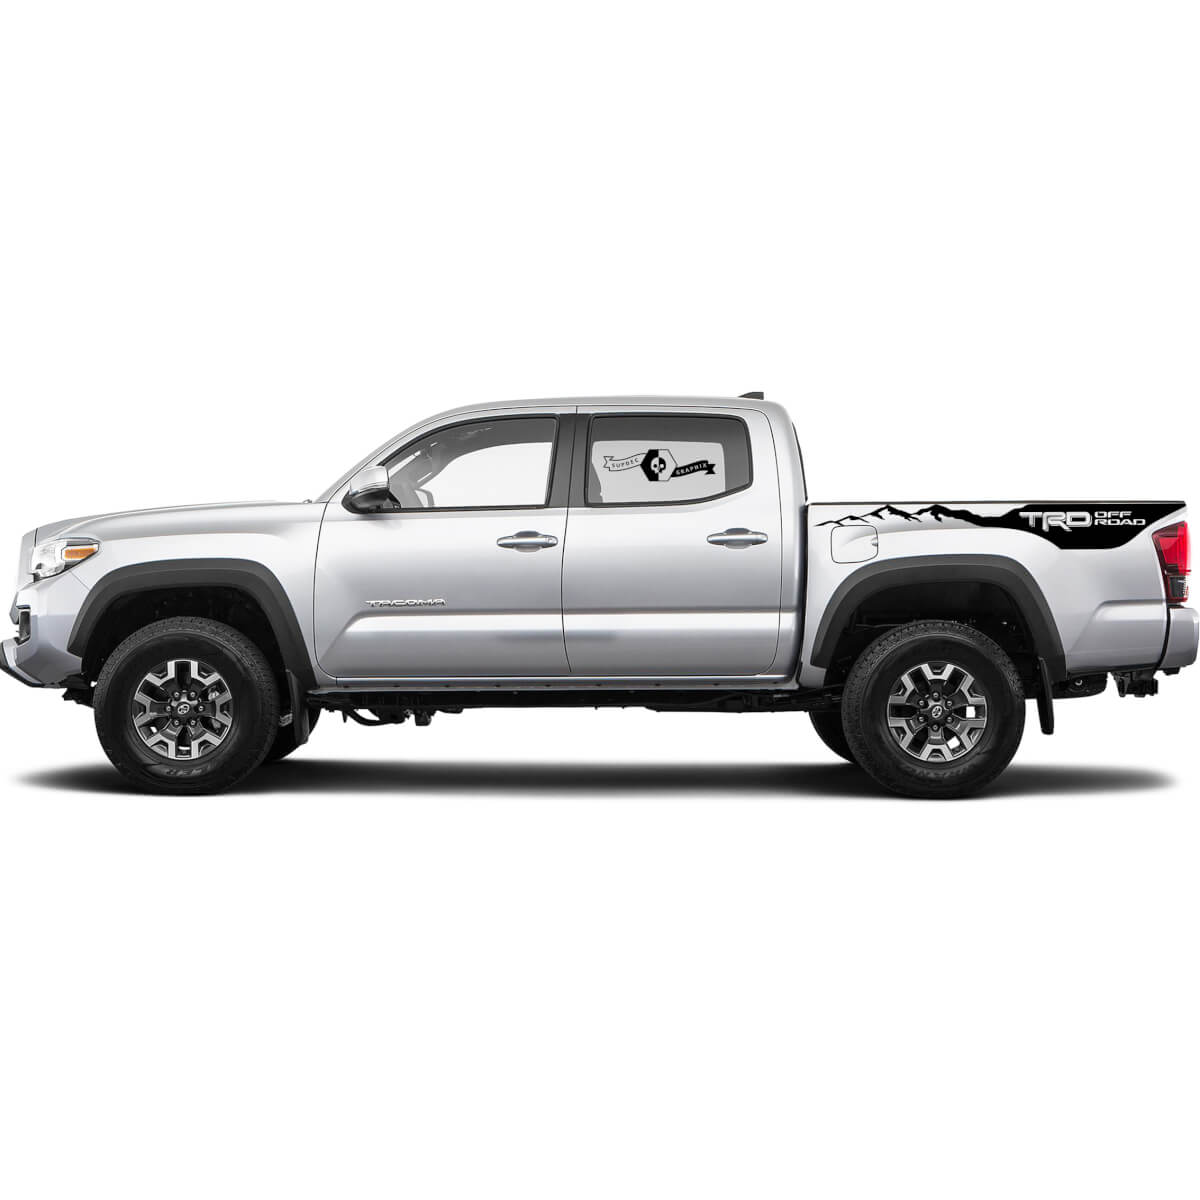 Toyota Tacoma TRD side bed graphics decal sticker model 5